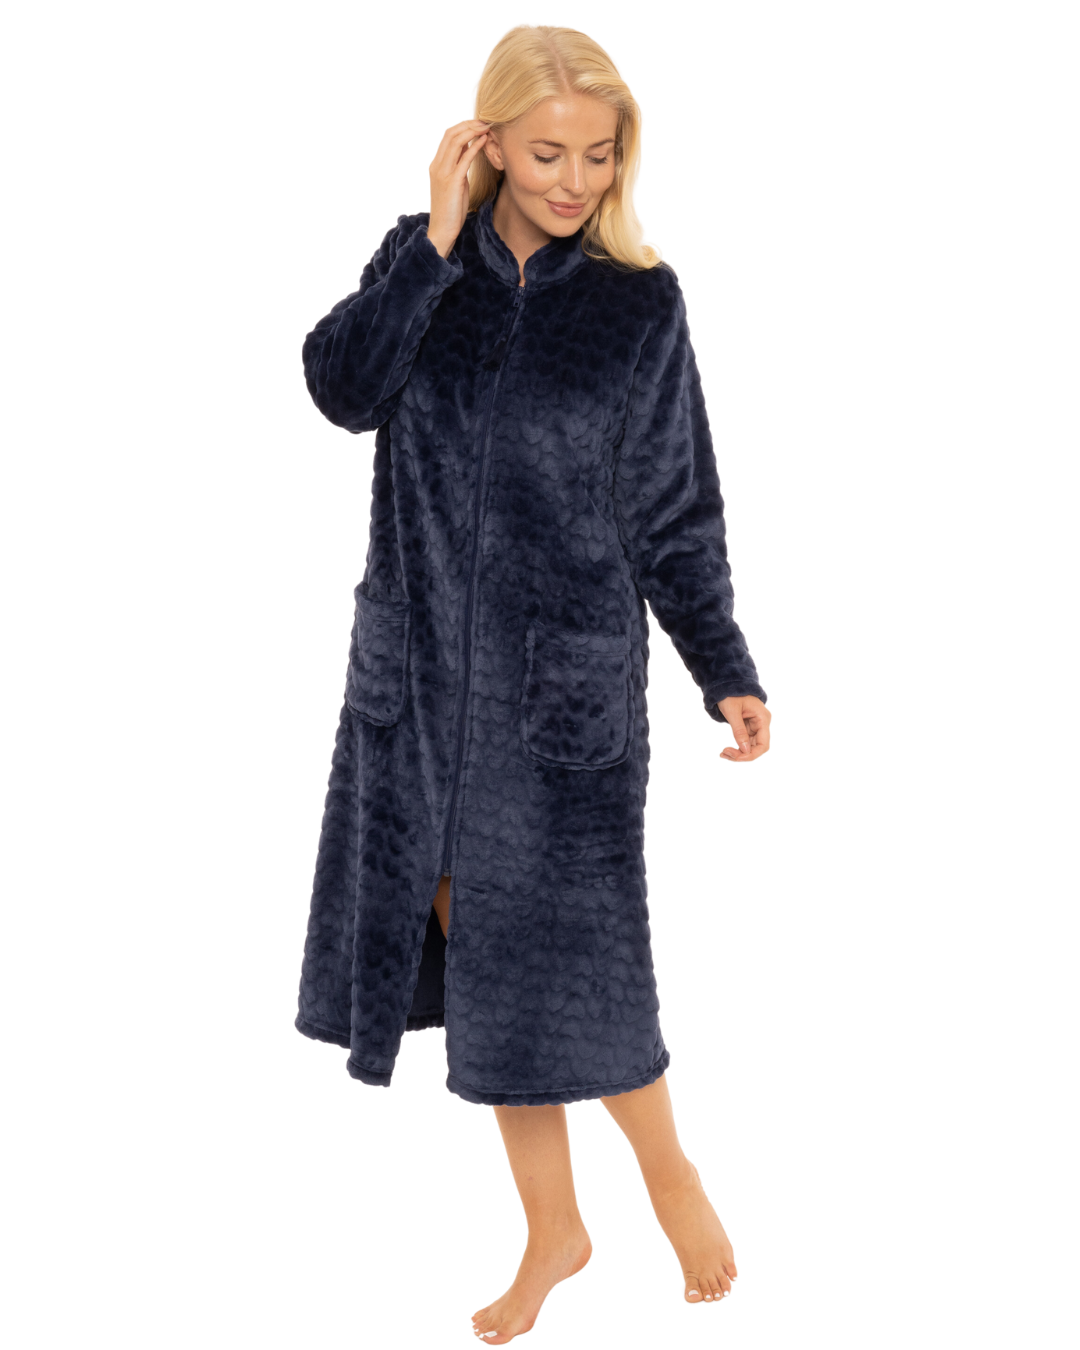 New Ladies Fleece Zip-up Dressing Gown Ex Marks And Spencer M&S Collection  - marlynn.co.uk